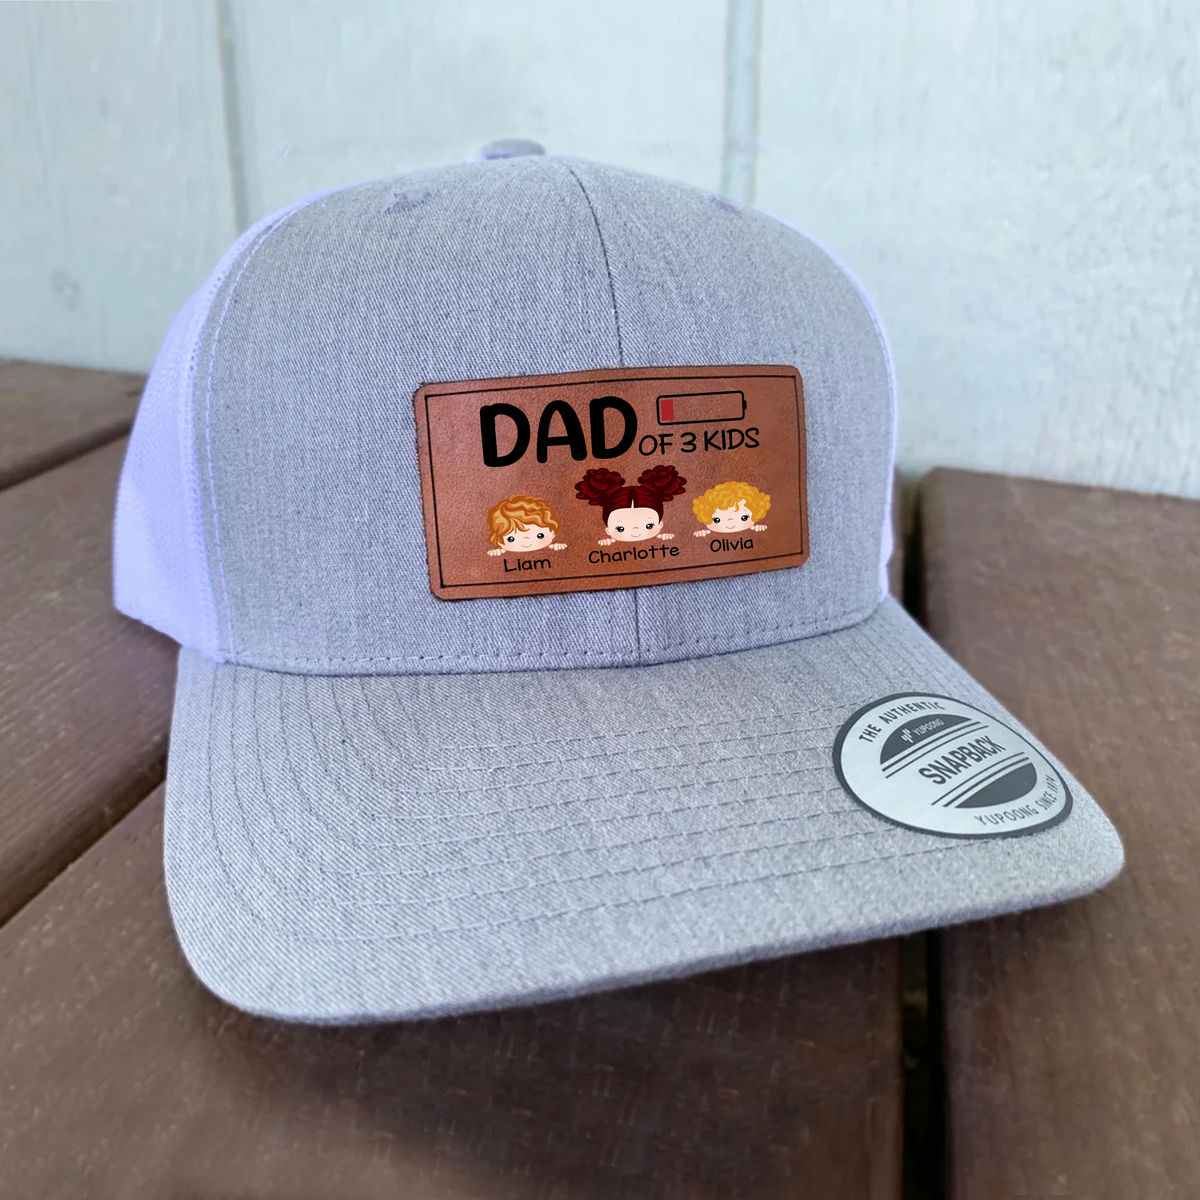 Dad Of Kid - Personalized Cap Ver 2 - Gifts For Him, Dad, Family Members, Father's Day Gifts, Birthday, Xmas Gifts